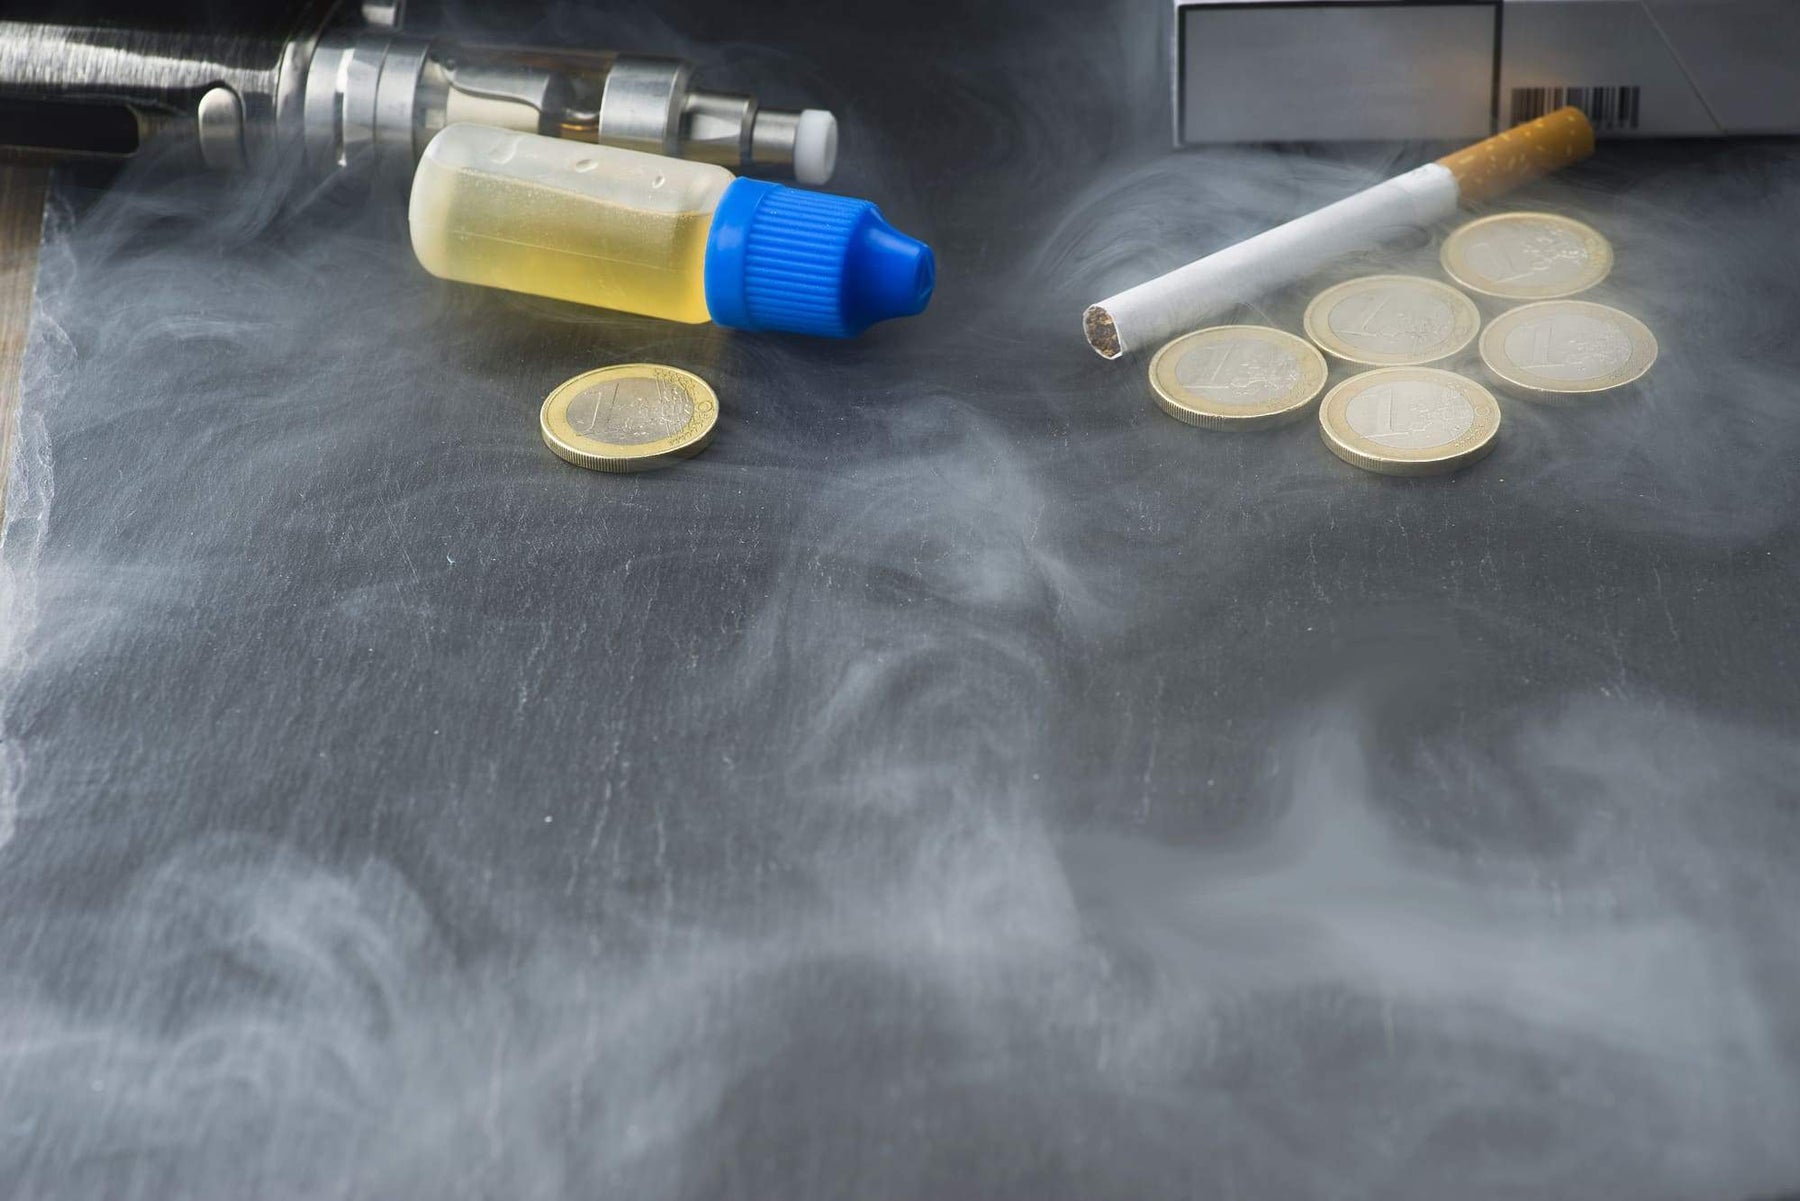 How Much Should You Pay for Vape Juice and Other Vape Products? | Cheap eJuice